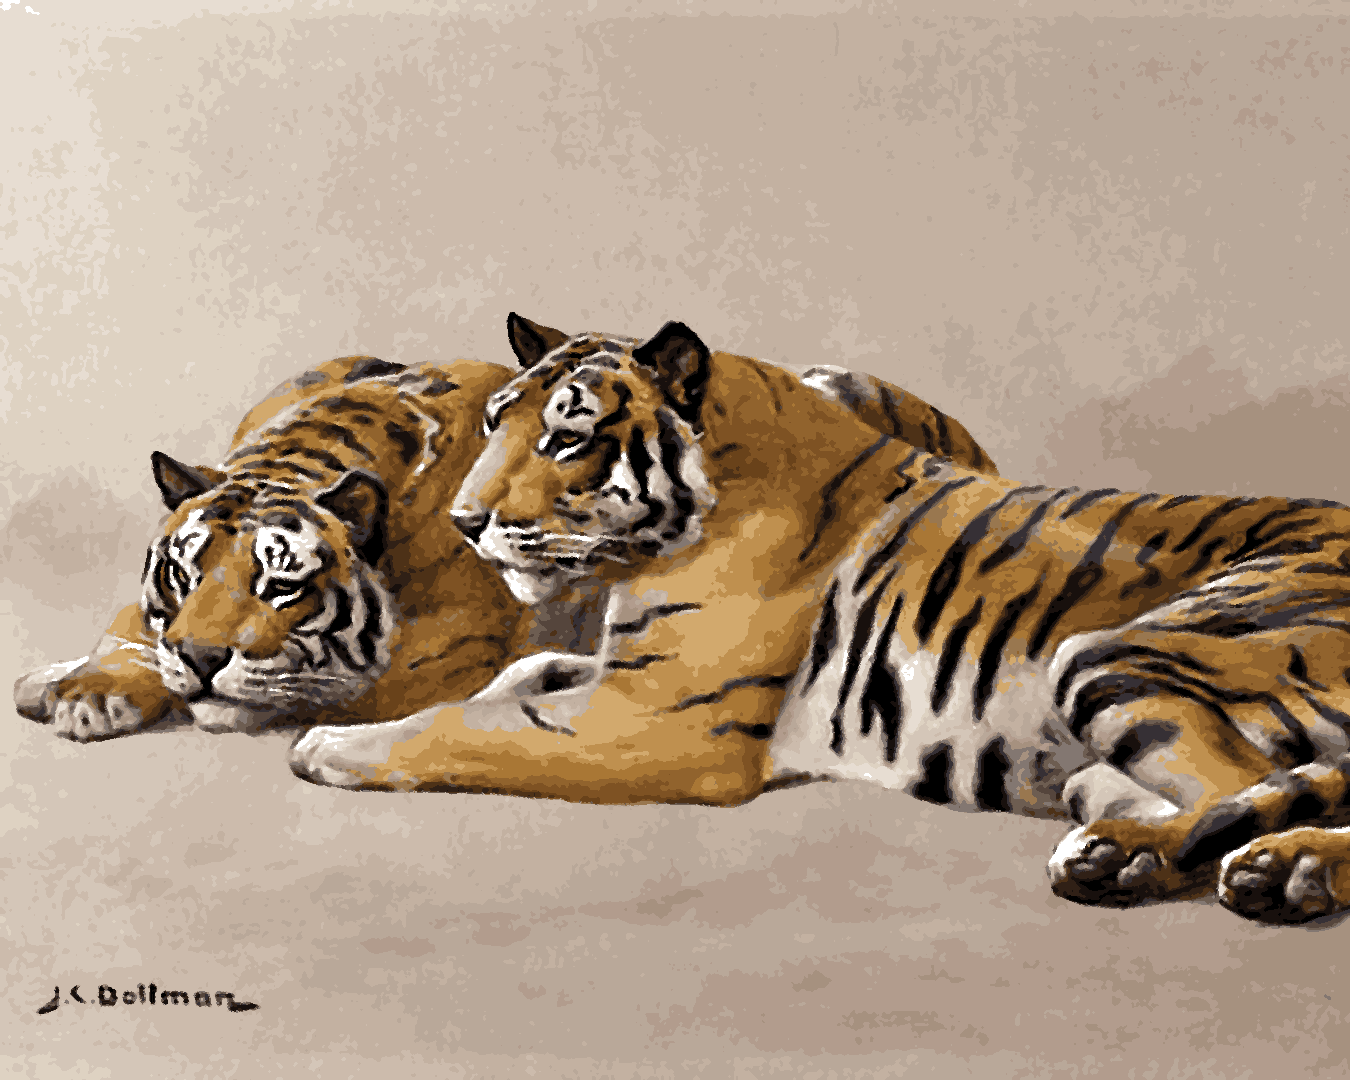 Tigers Collection PD (33) - Tiger Studies by John Charles Dollman - Van-Go Paint-By-Number Kit